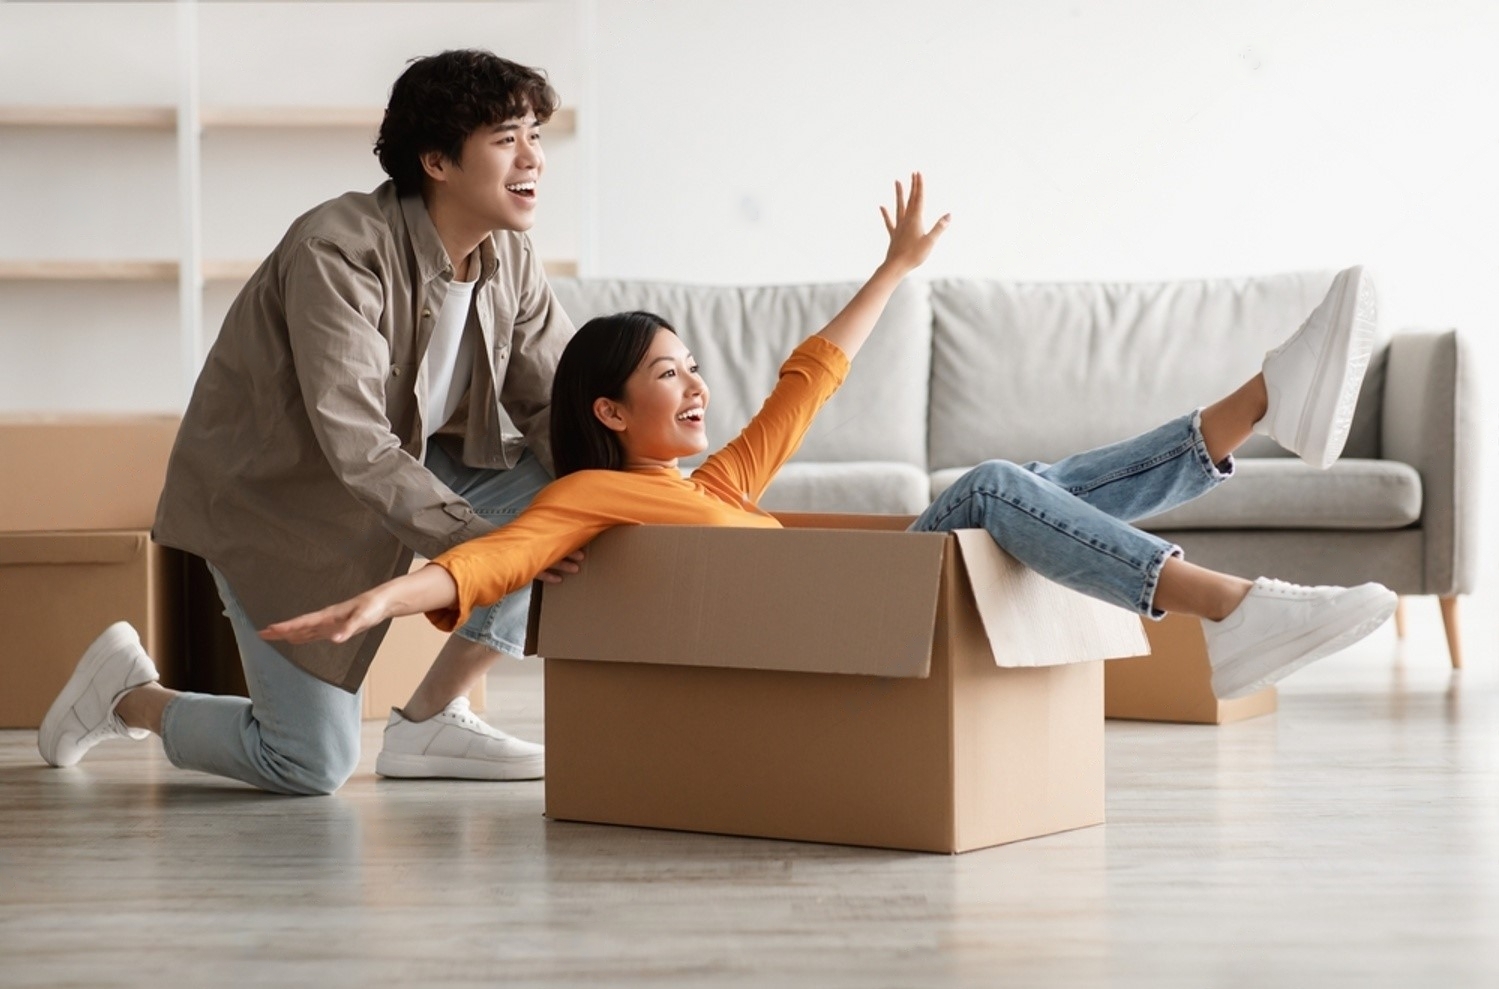 -asian-couple-having-fun-in-their-home-on-relocation-day-millennial-woman-and-her-2090125699-transformed-16789646787671797338837-1679052434122-1679052434999108471713.jpeg